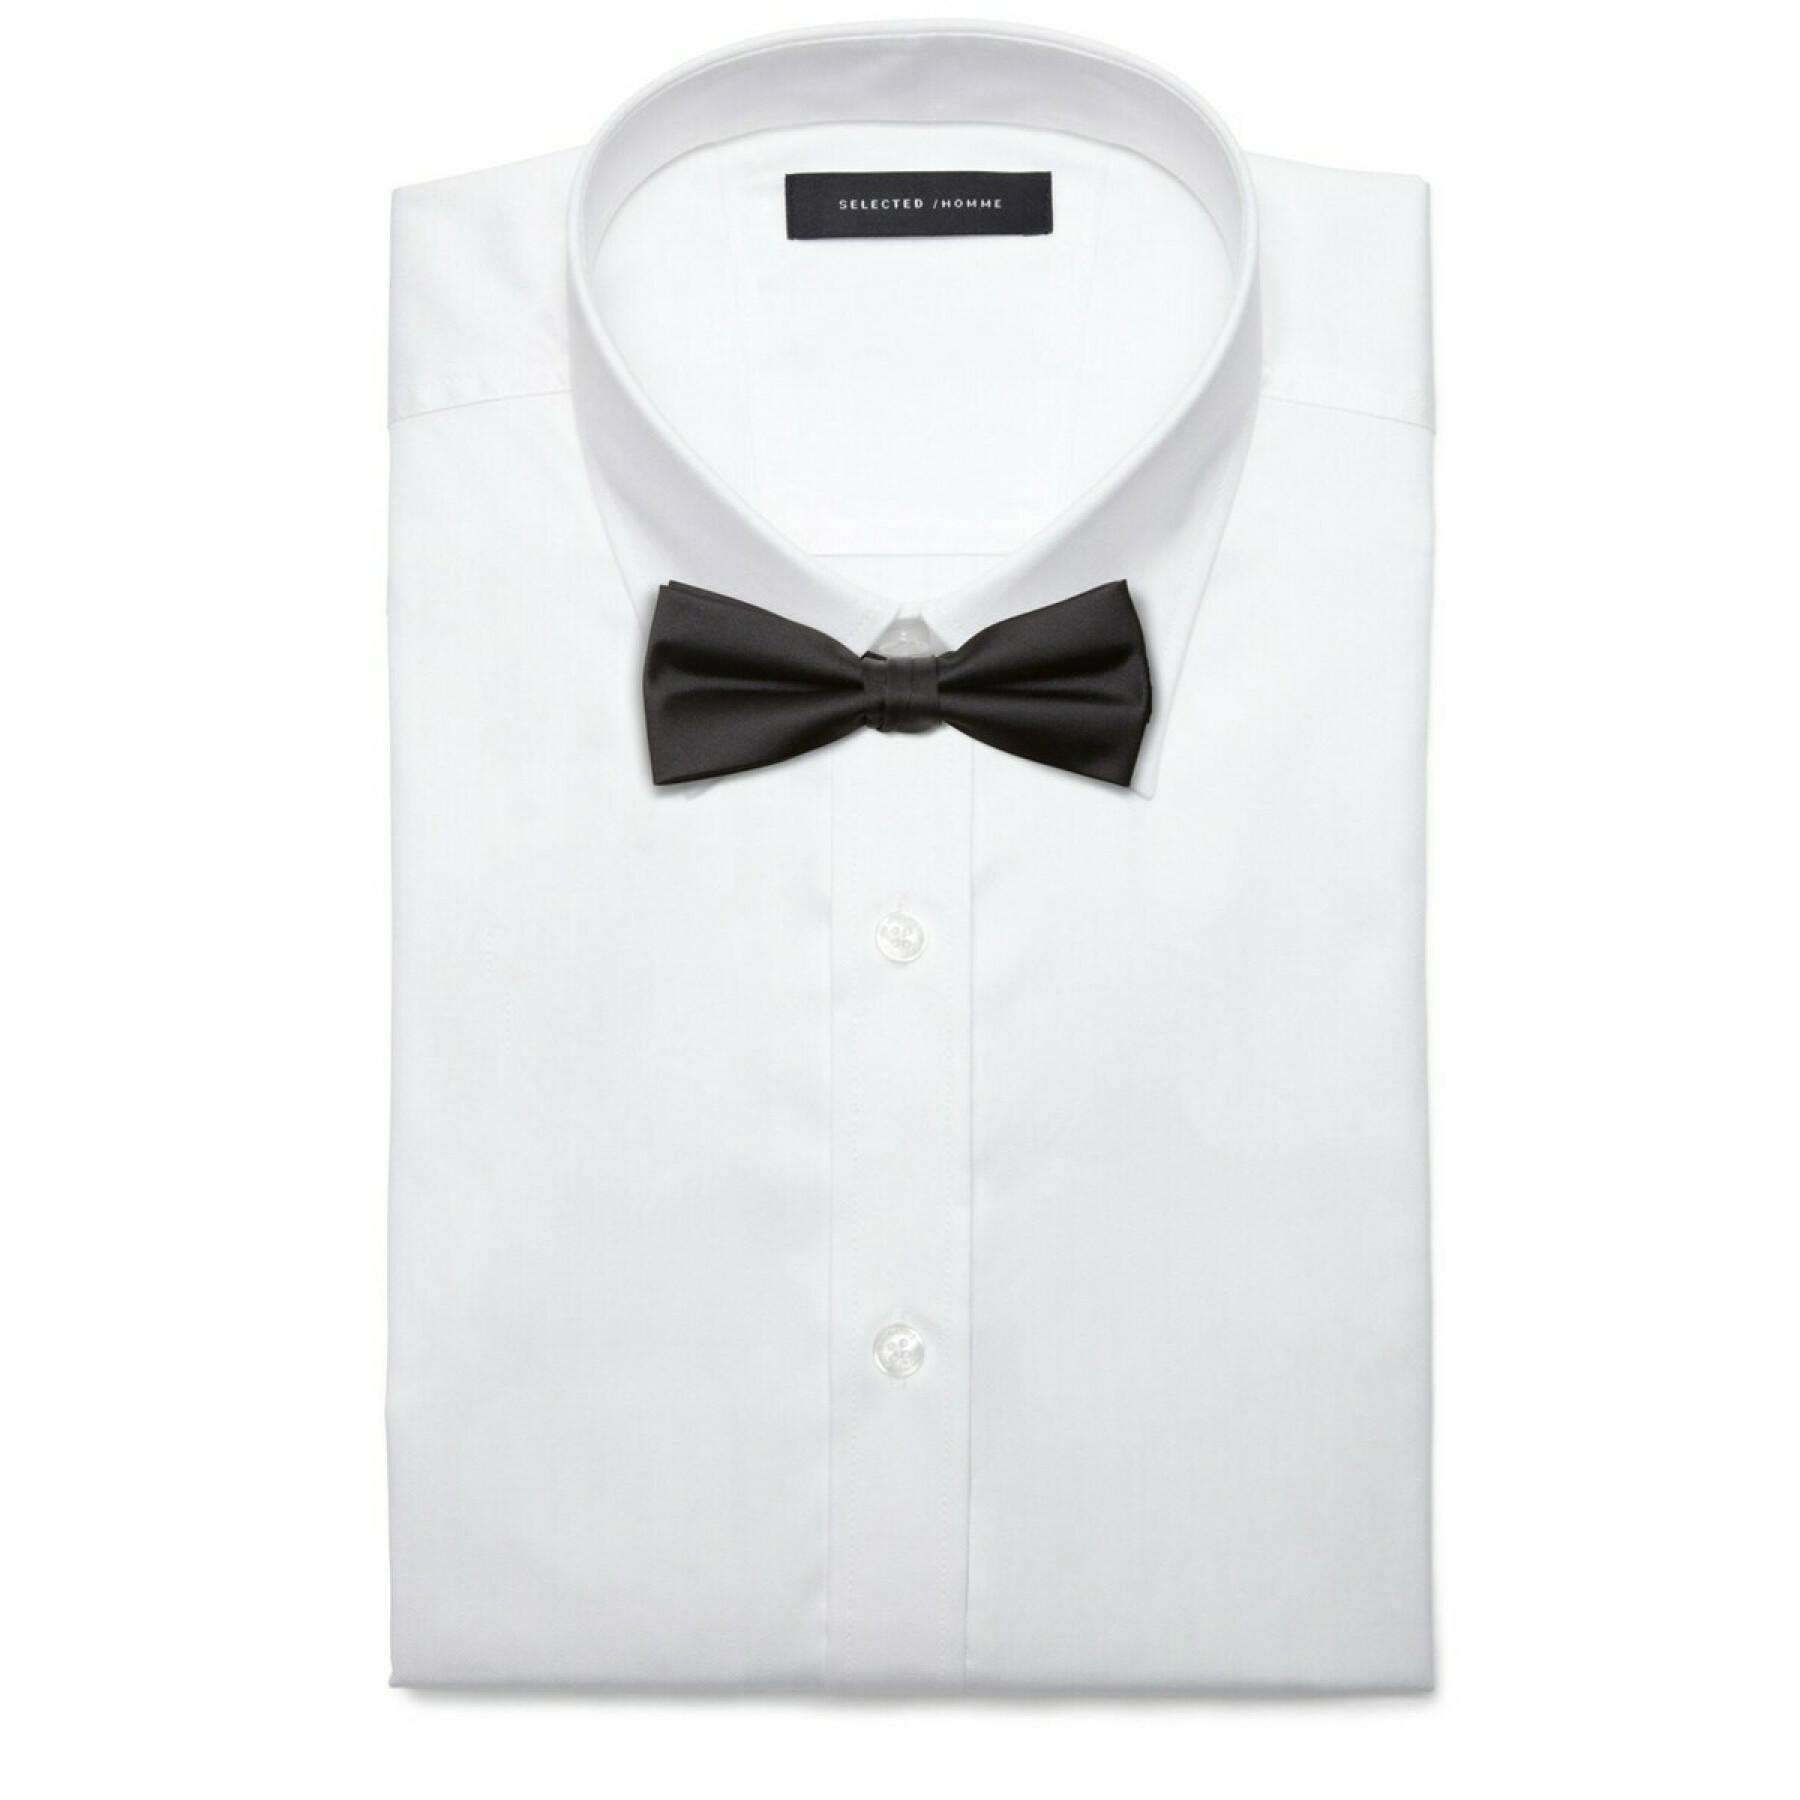 Bow tie Selected